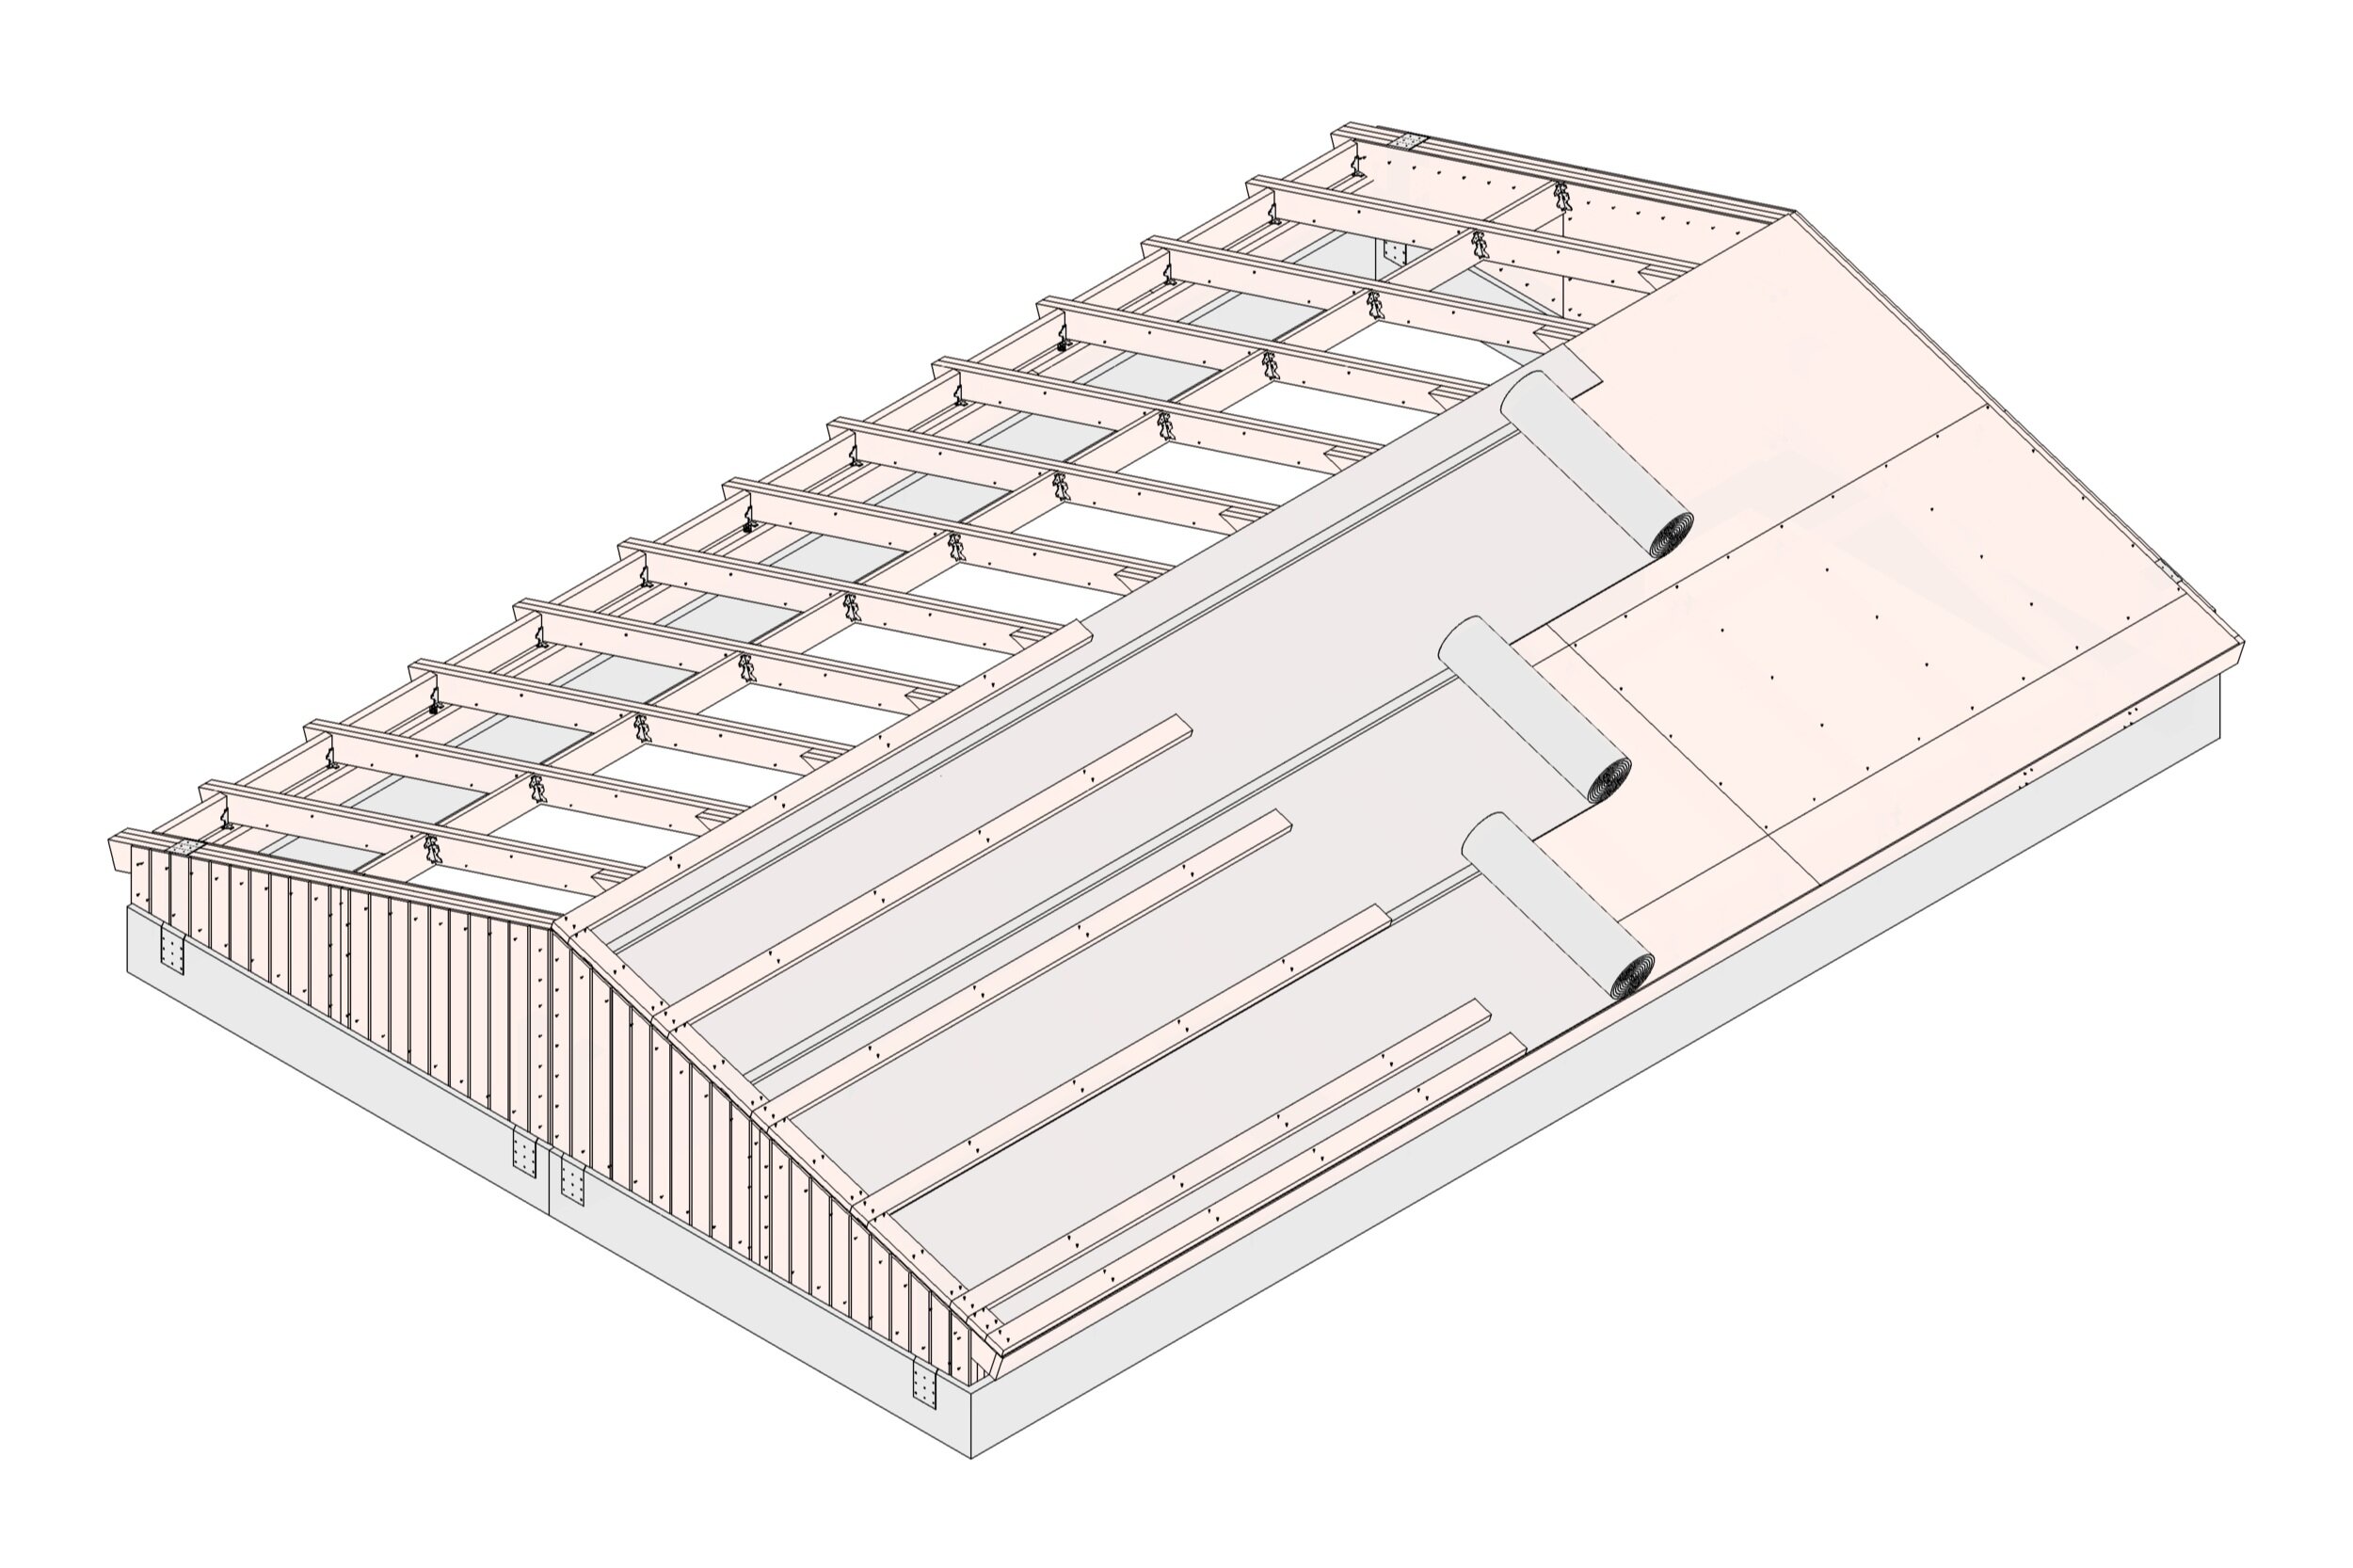  Illustration of a wooden roof frame and diaphragm assembly components on an existing CMU house. Techos 2019 Design Guidelines.  